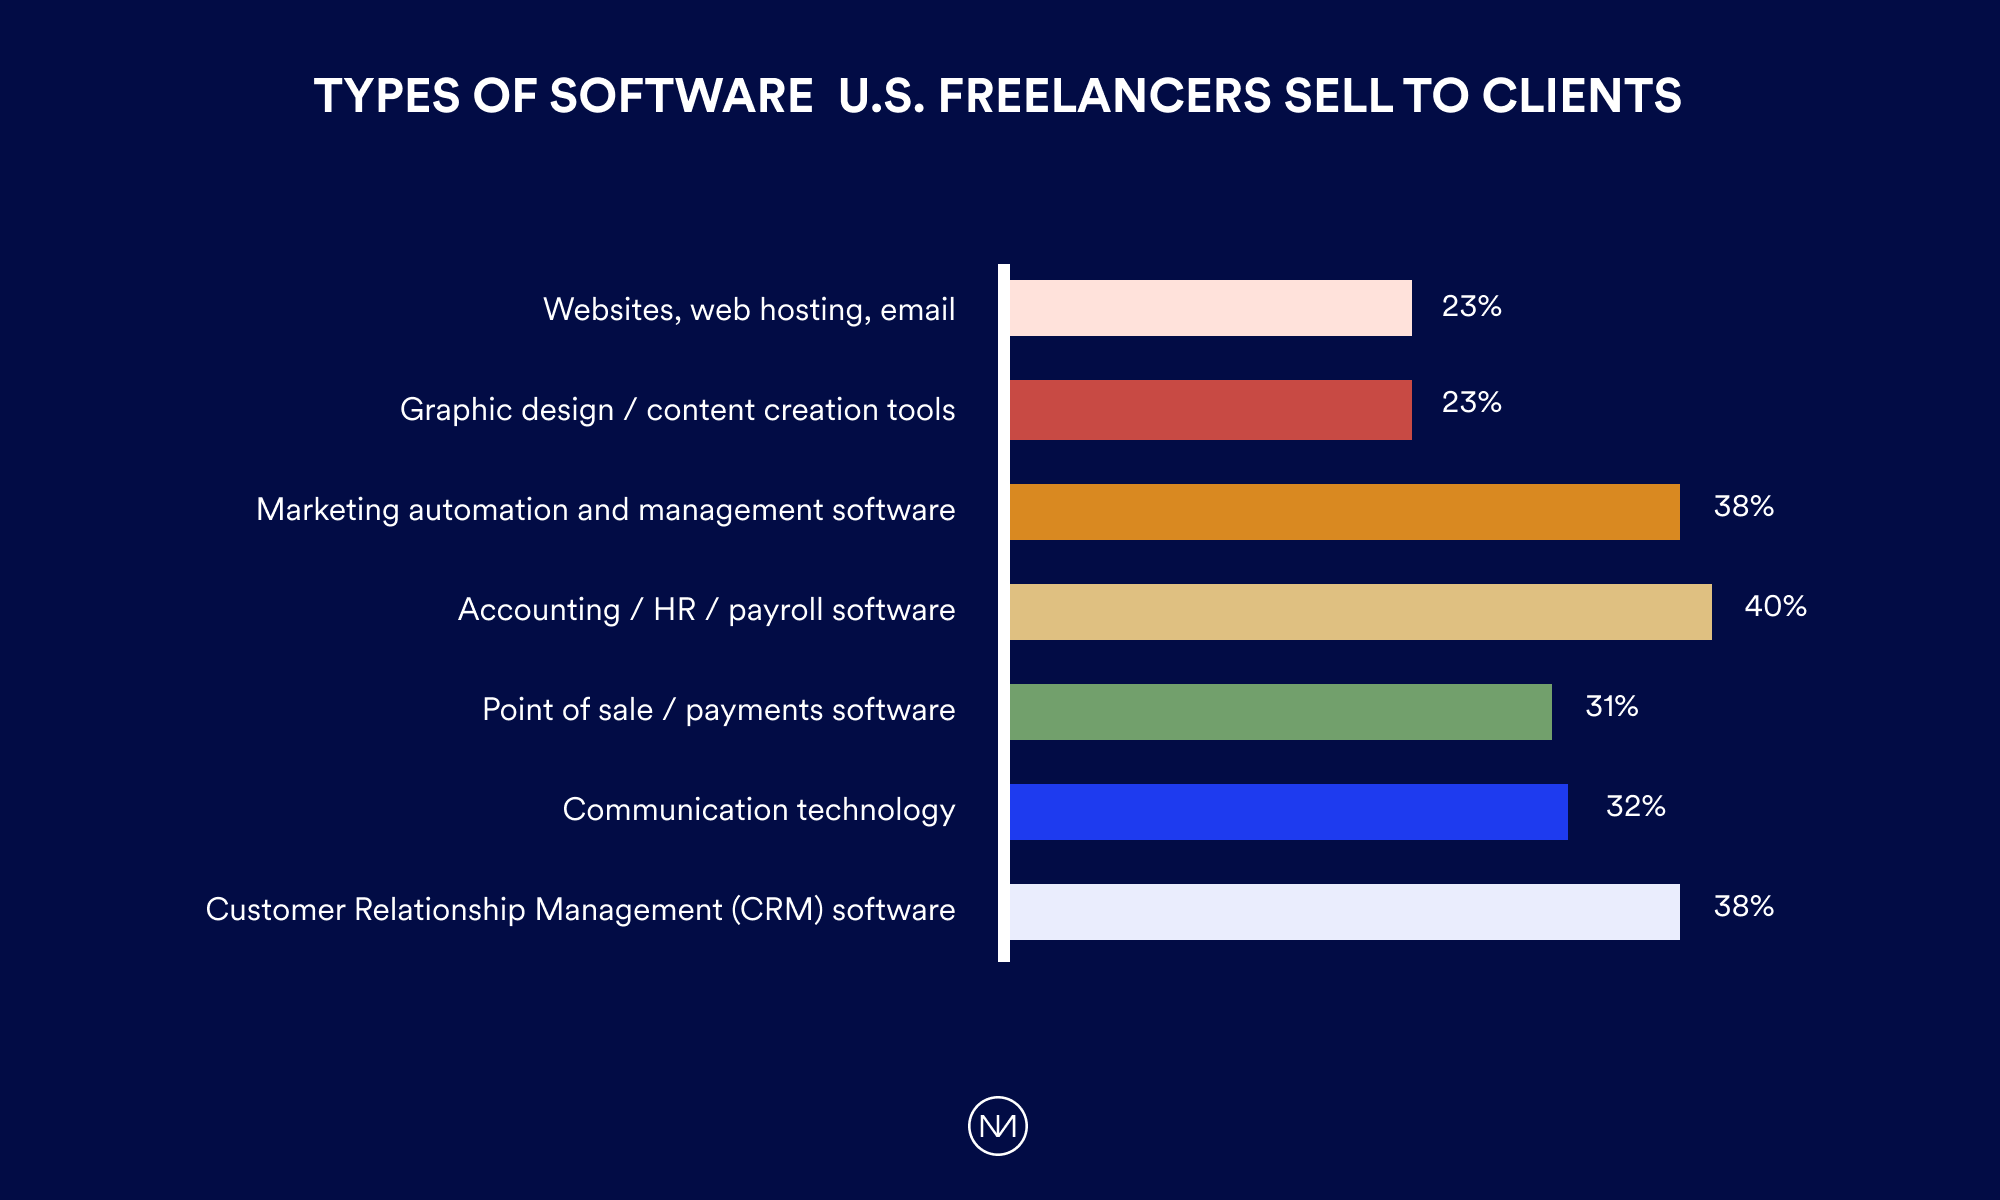 Types of software U.S. freelancers sell to clients